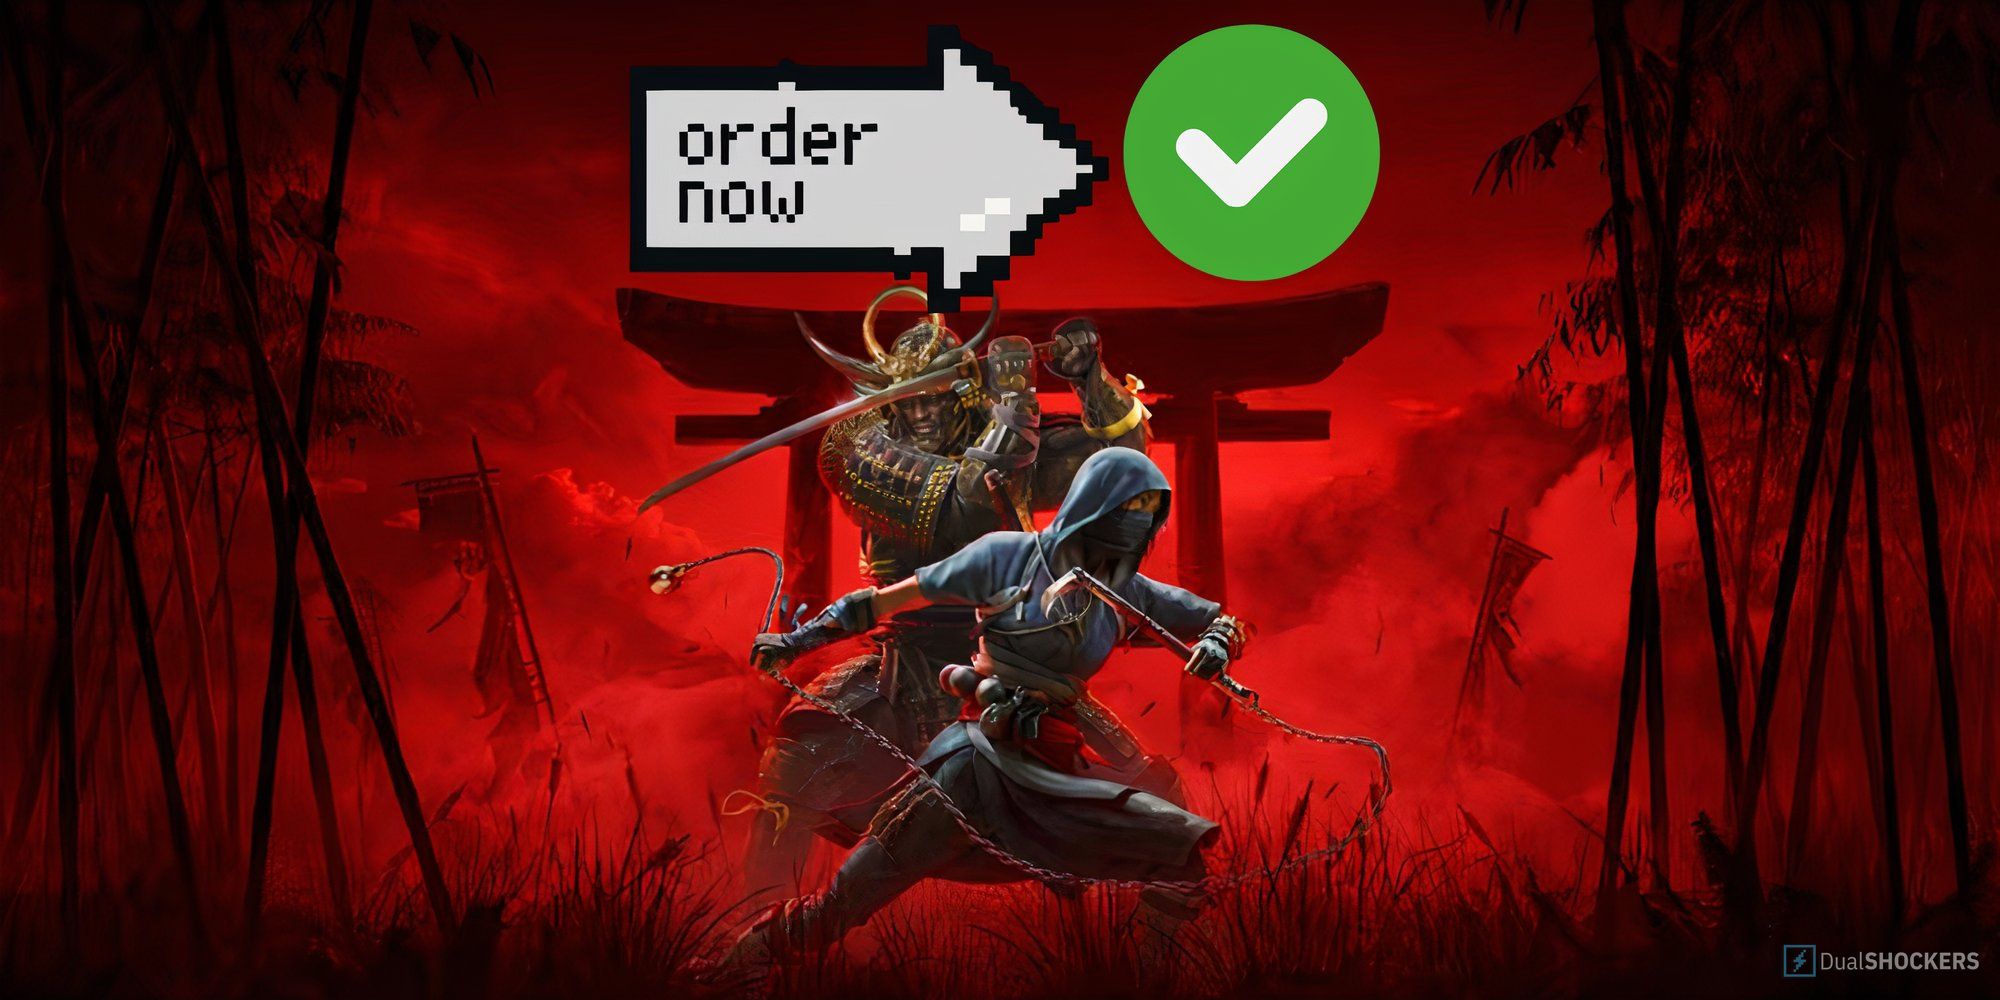 Promotional image of Yasuke and Naoe from Assassin's Creed Shadows with an Order Now and Green Tick sticker.